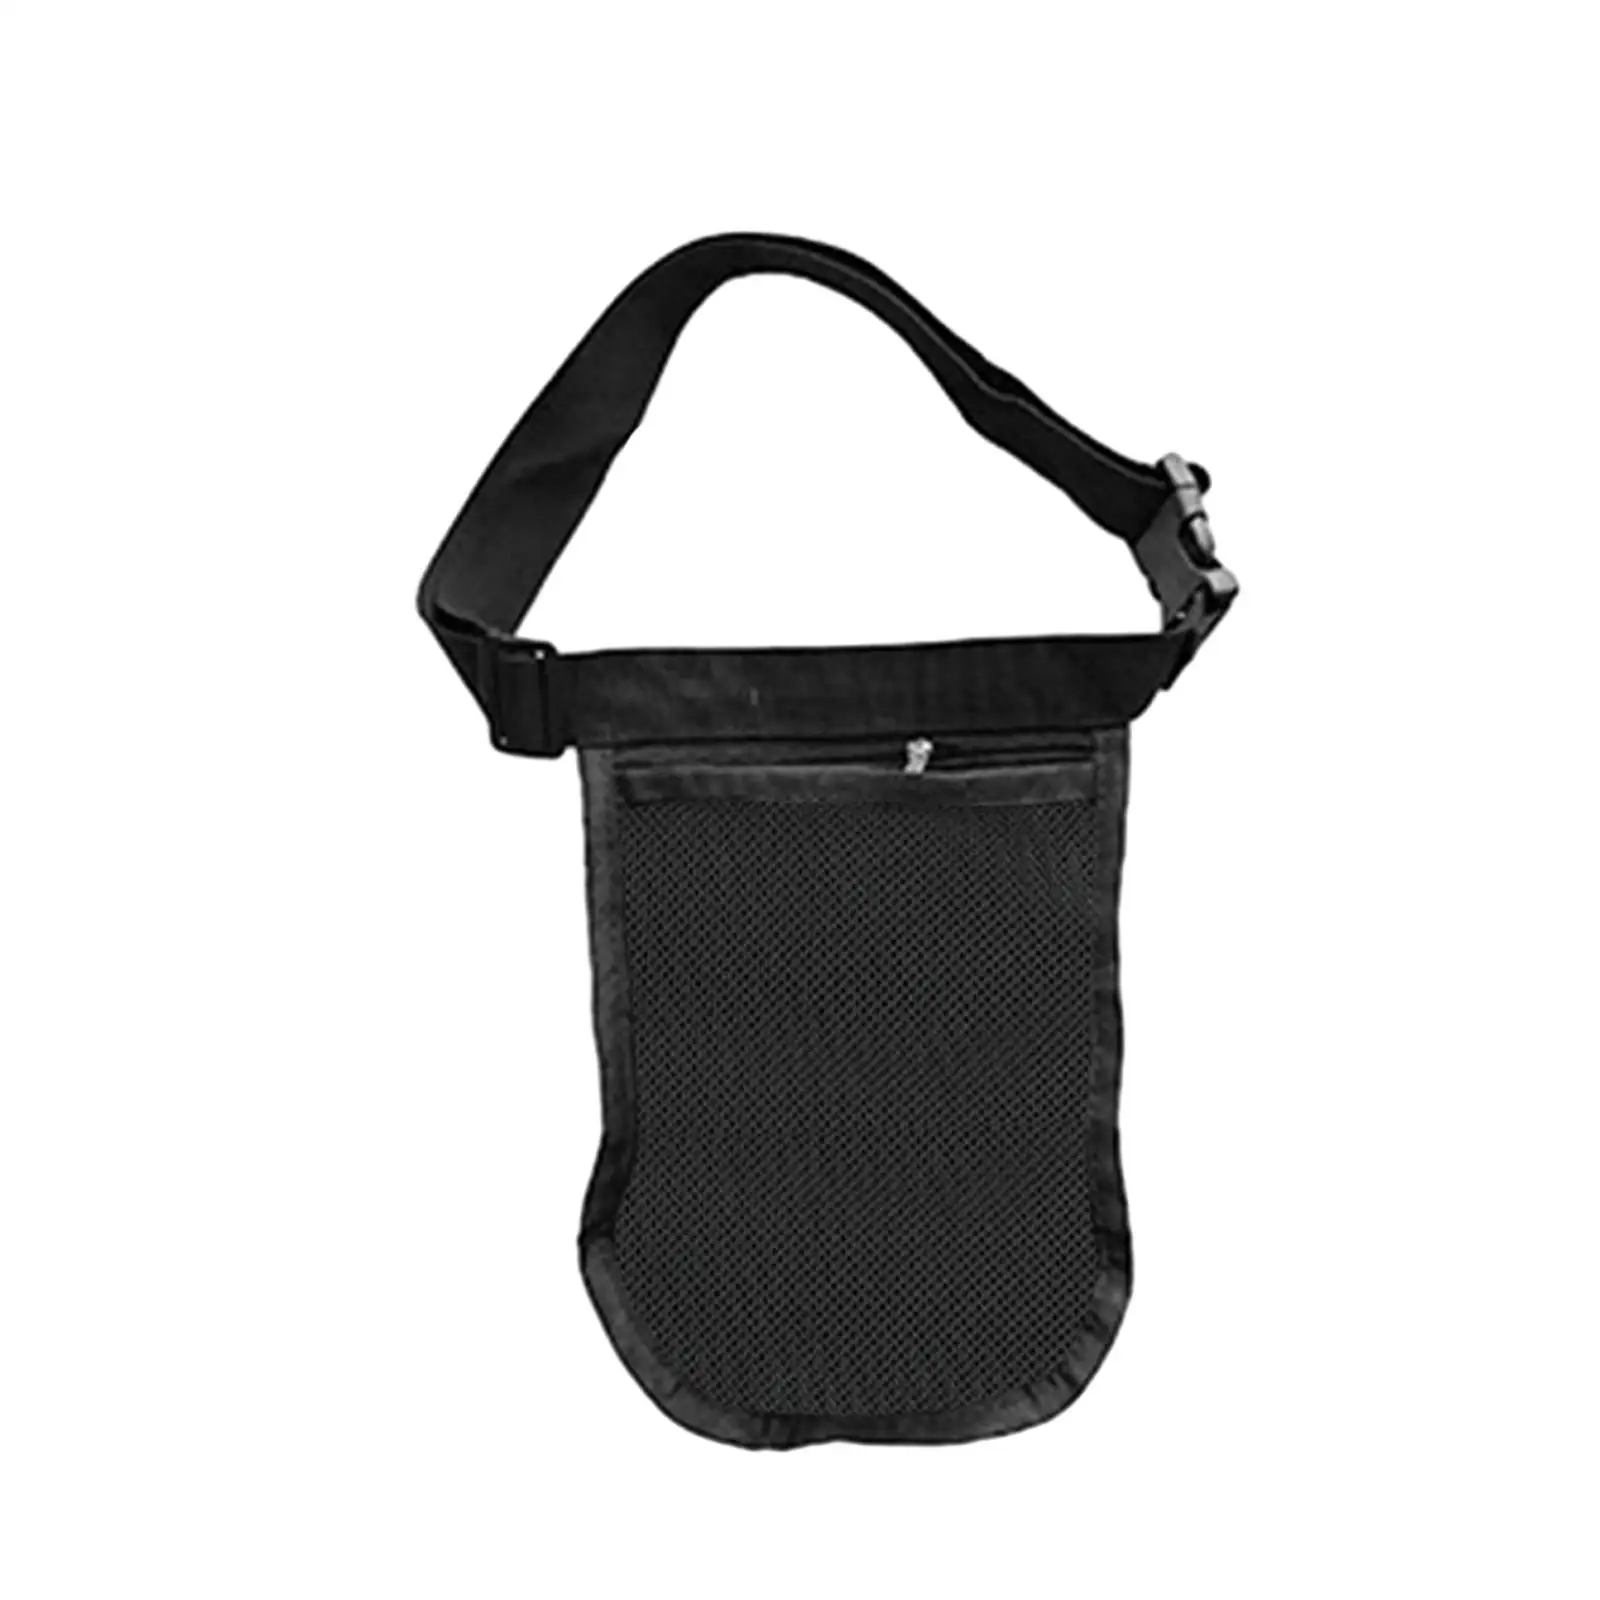 Tennis Ball Holder Tennis Pickleball Accessory Carrier Gadgets Outdoor Ball Storage Bag for Fitness Workout Exercise